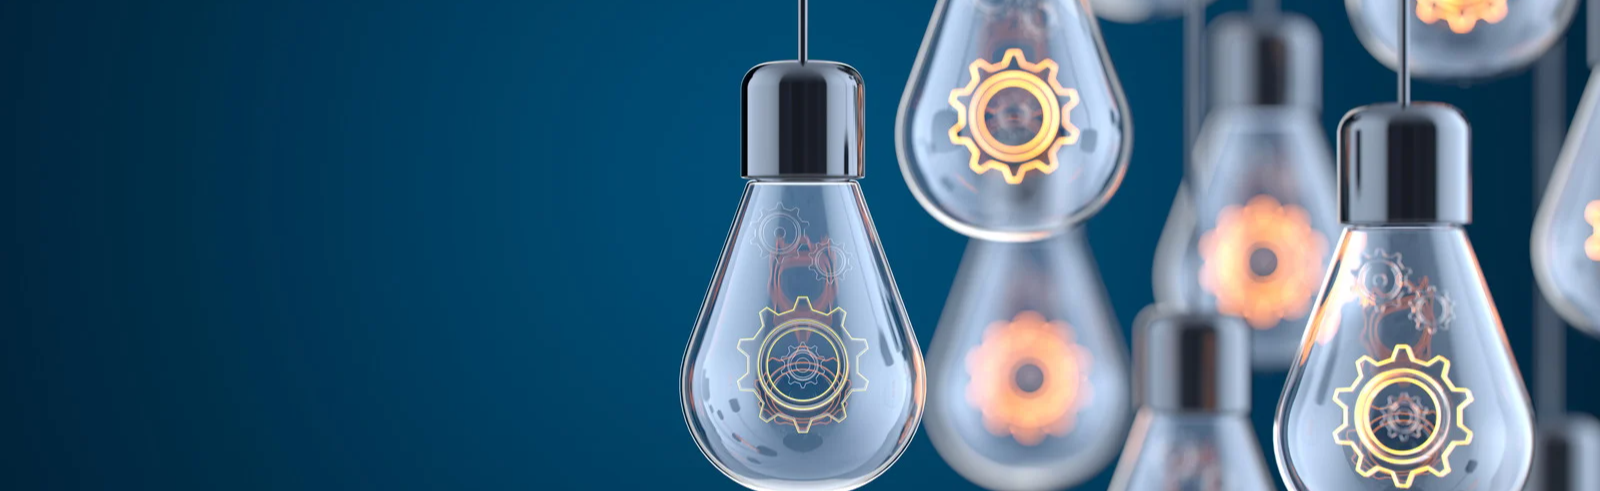 Lightbulbs with lit cogs hanging on black wires